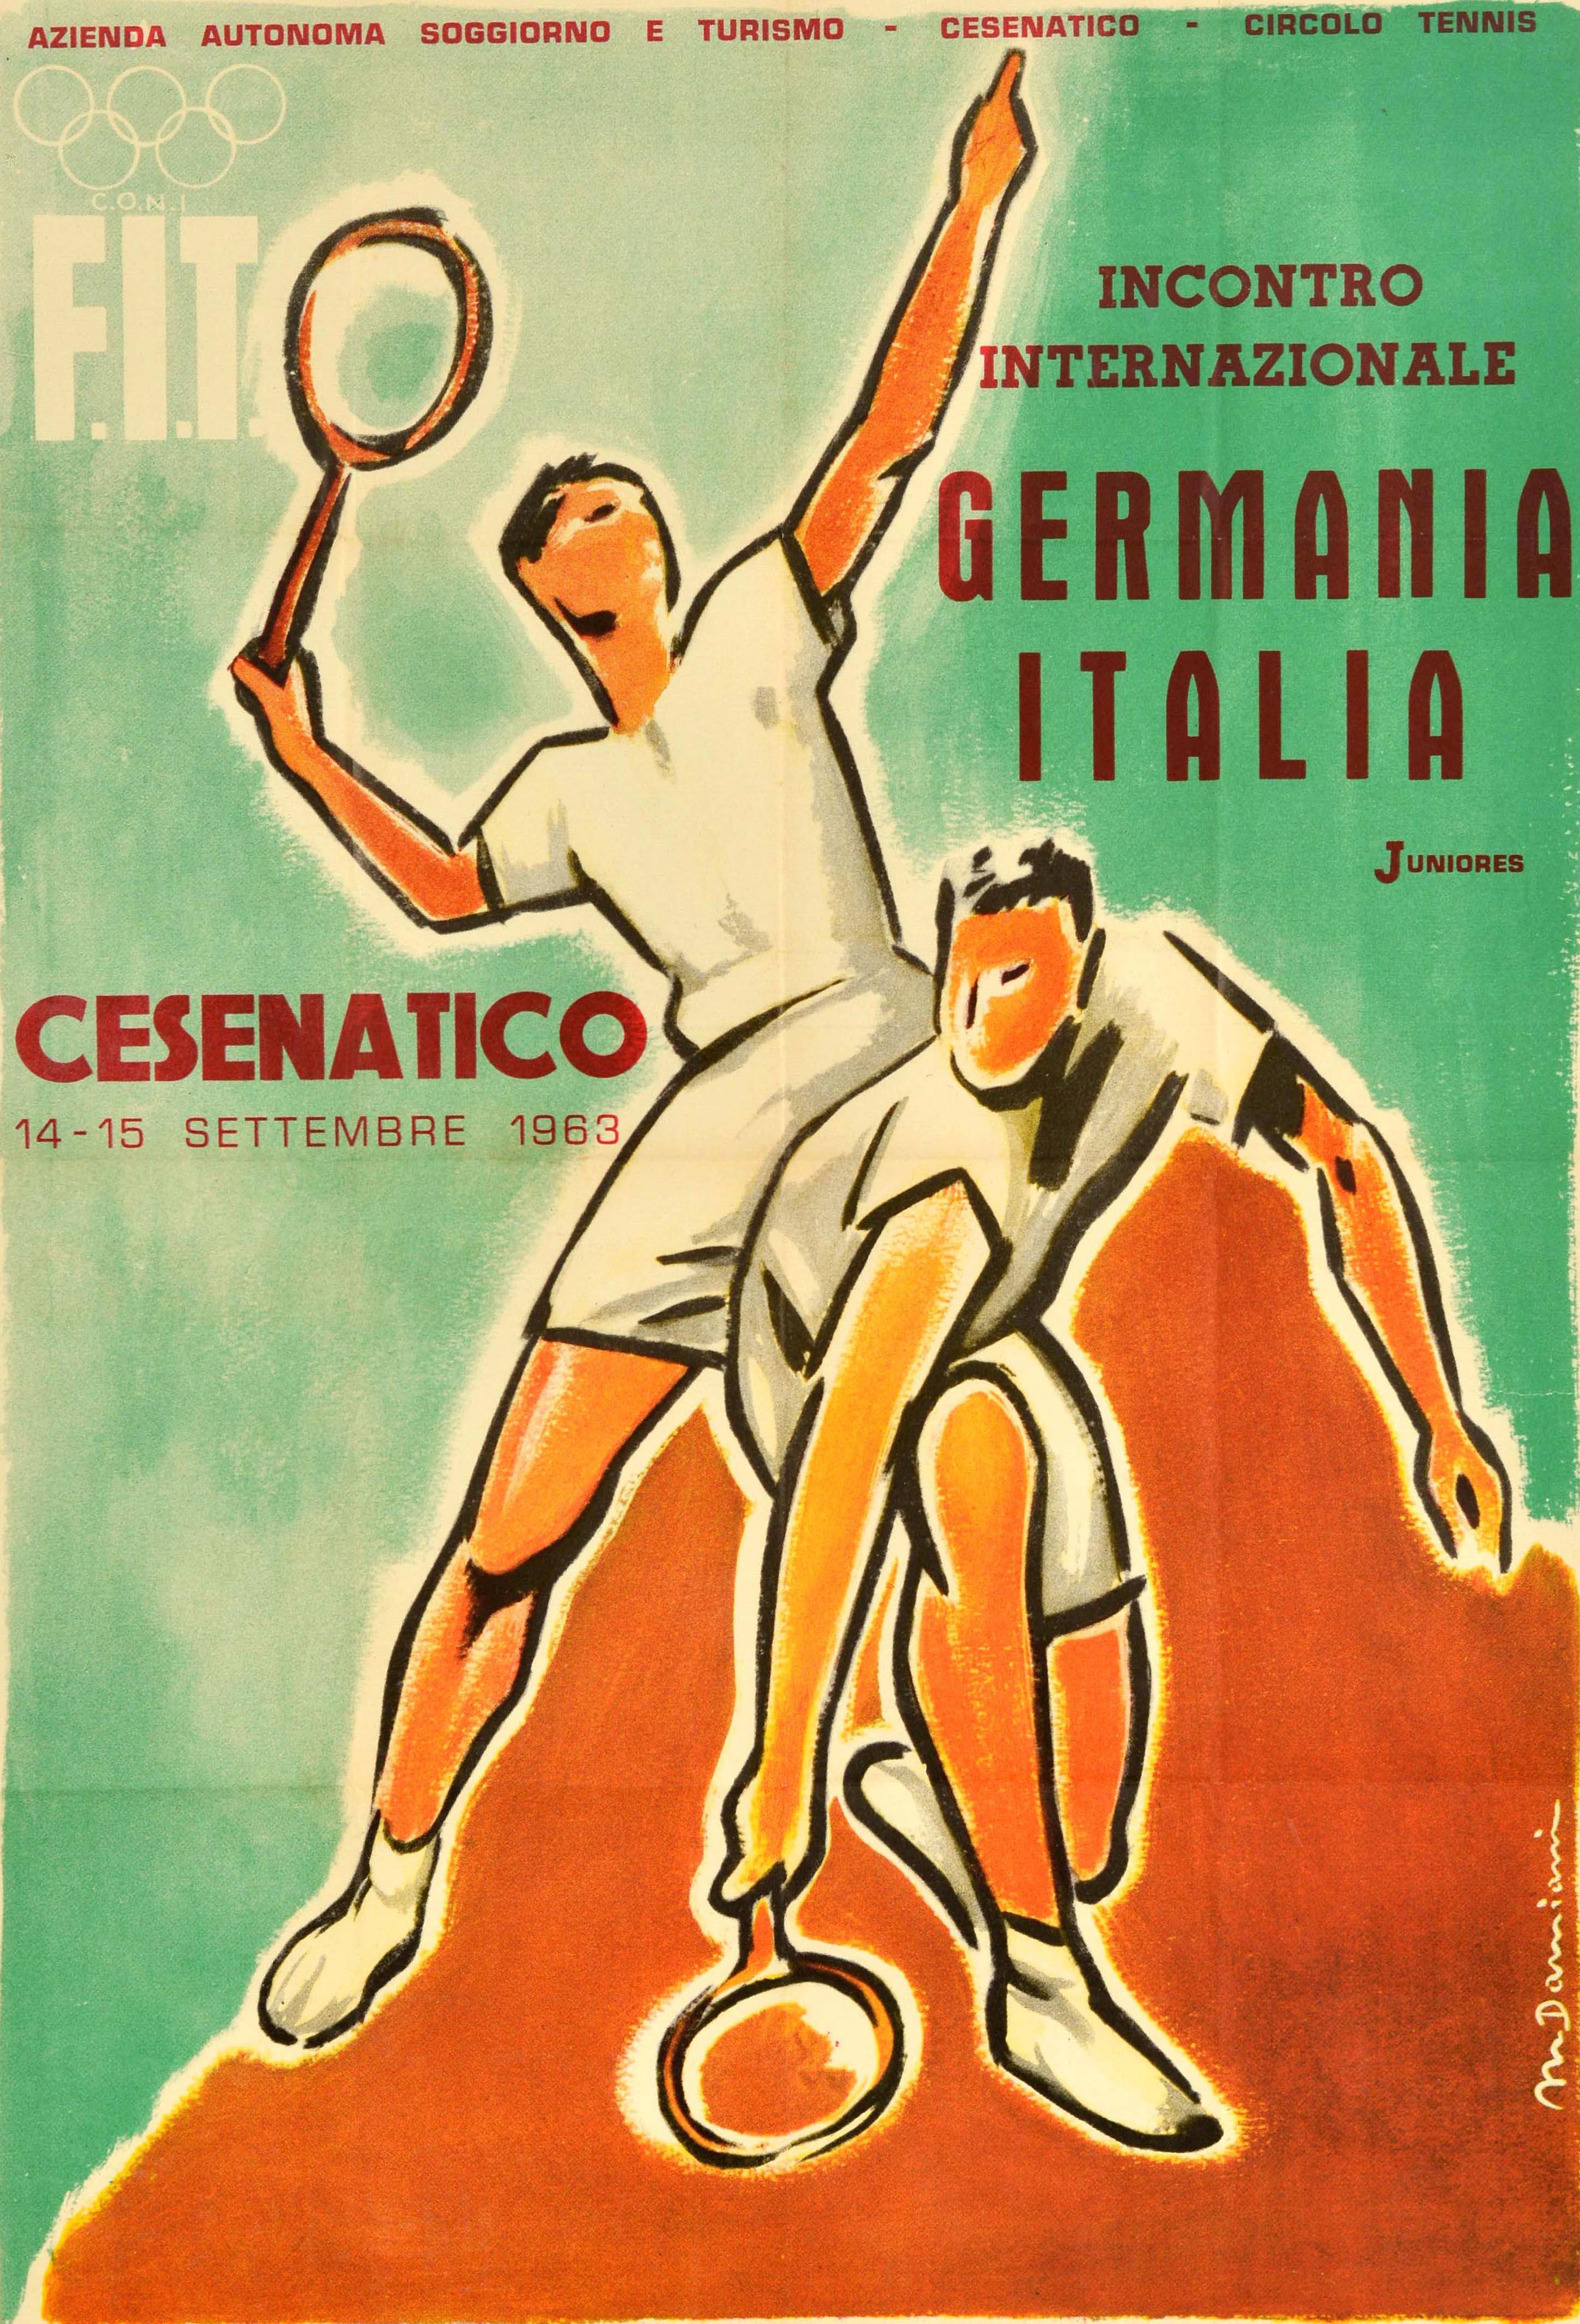 Original Vintage Sport Poster Cesenatico Tennis Meeting Germany Italy Coni FIT - Print by Unknown